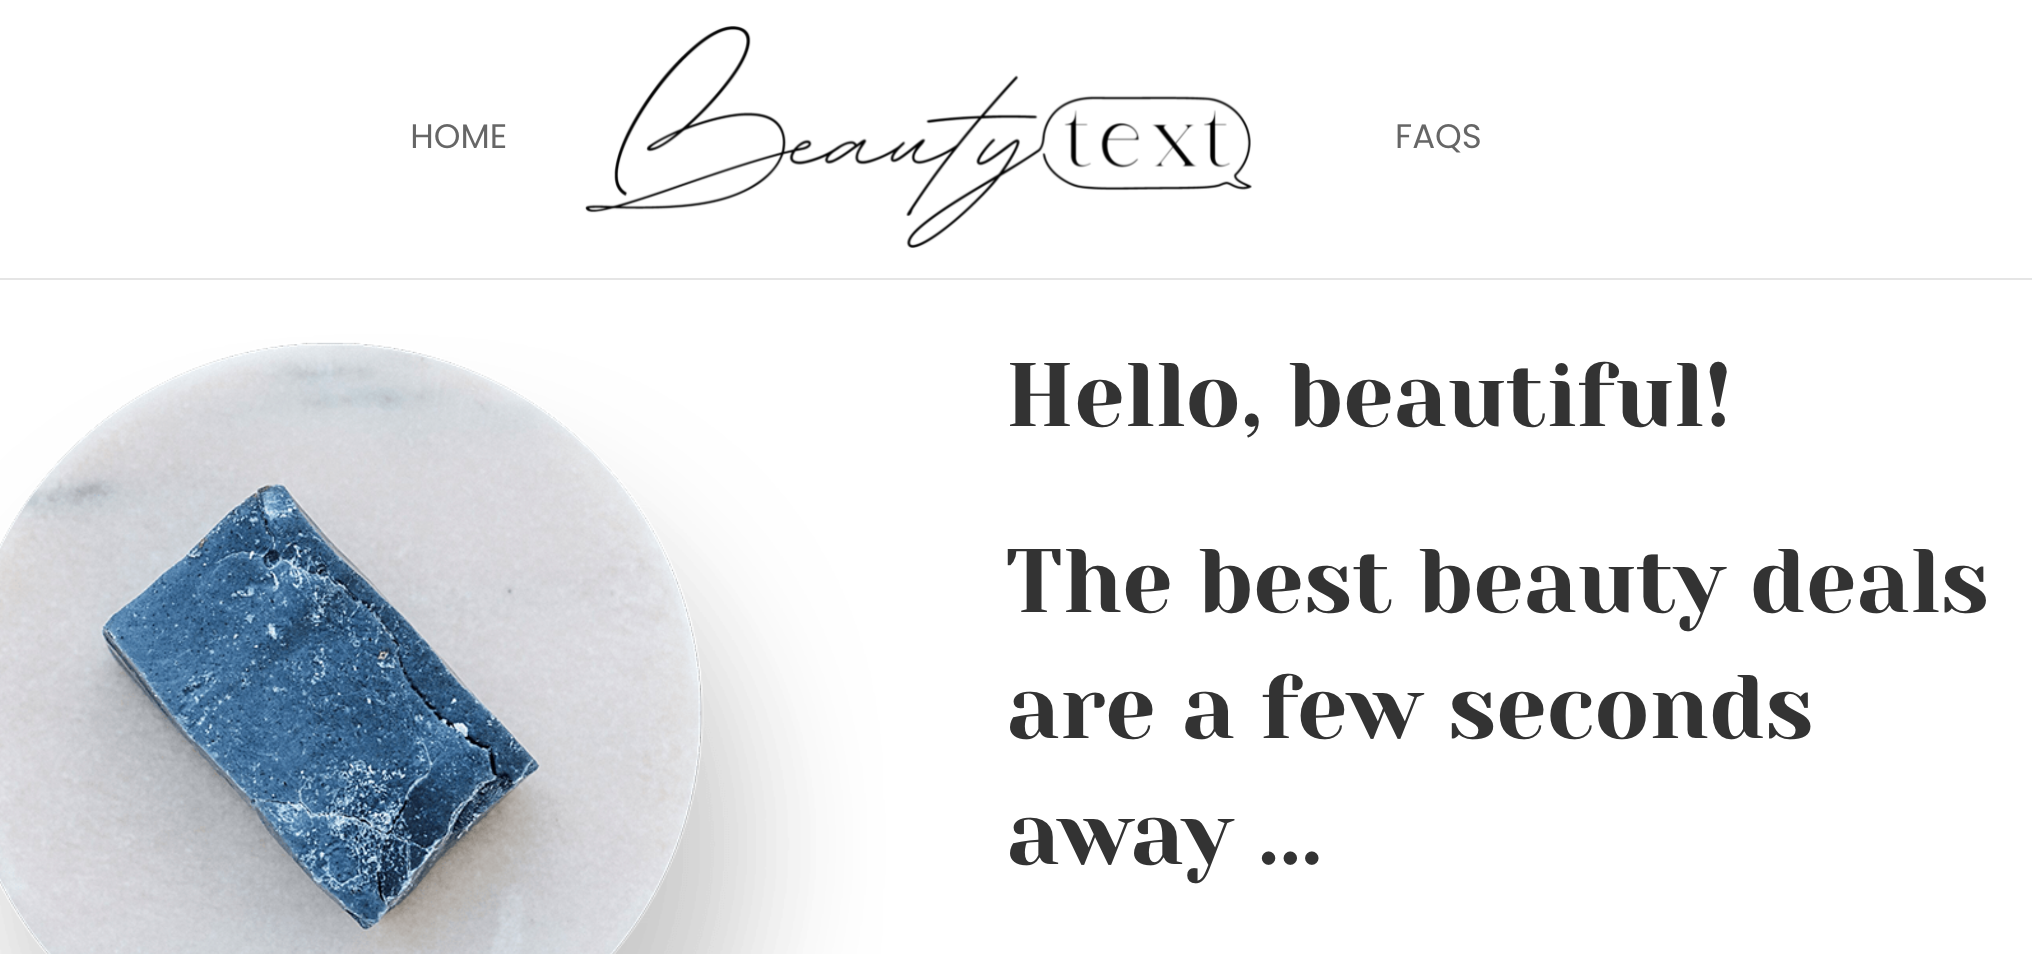 Beauty Text homepage